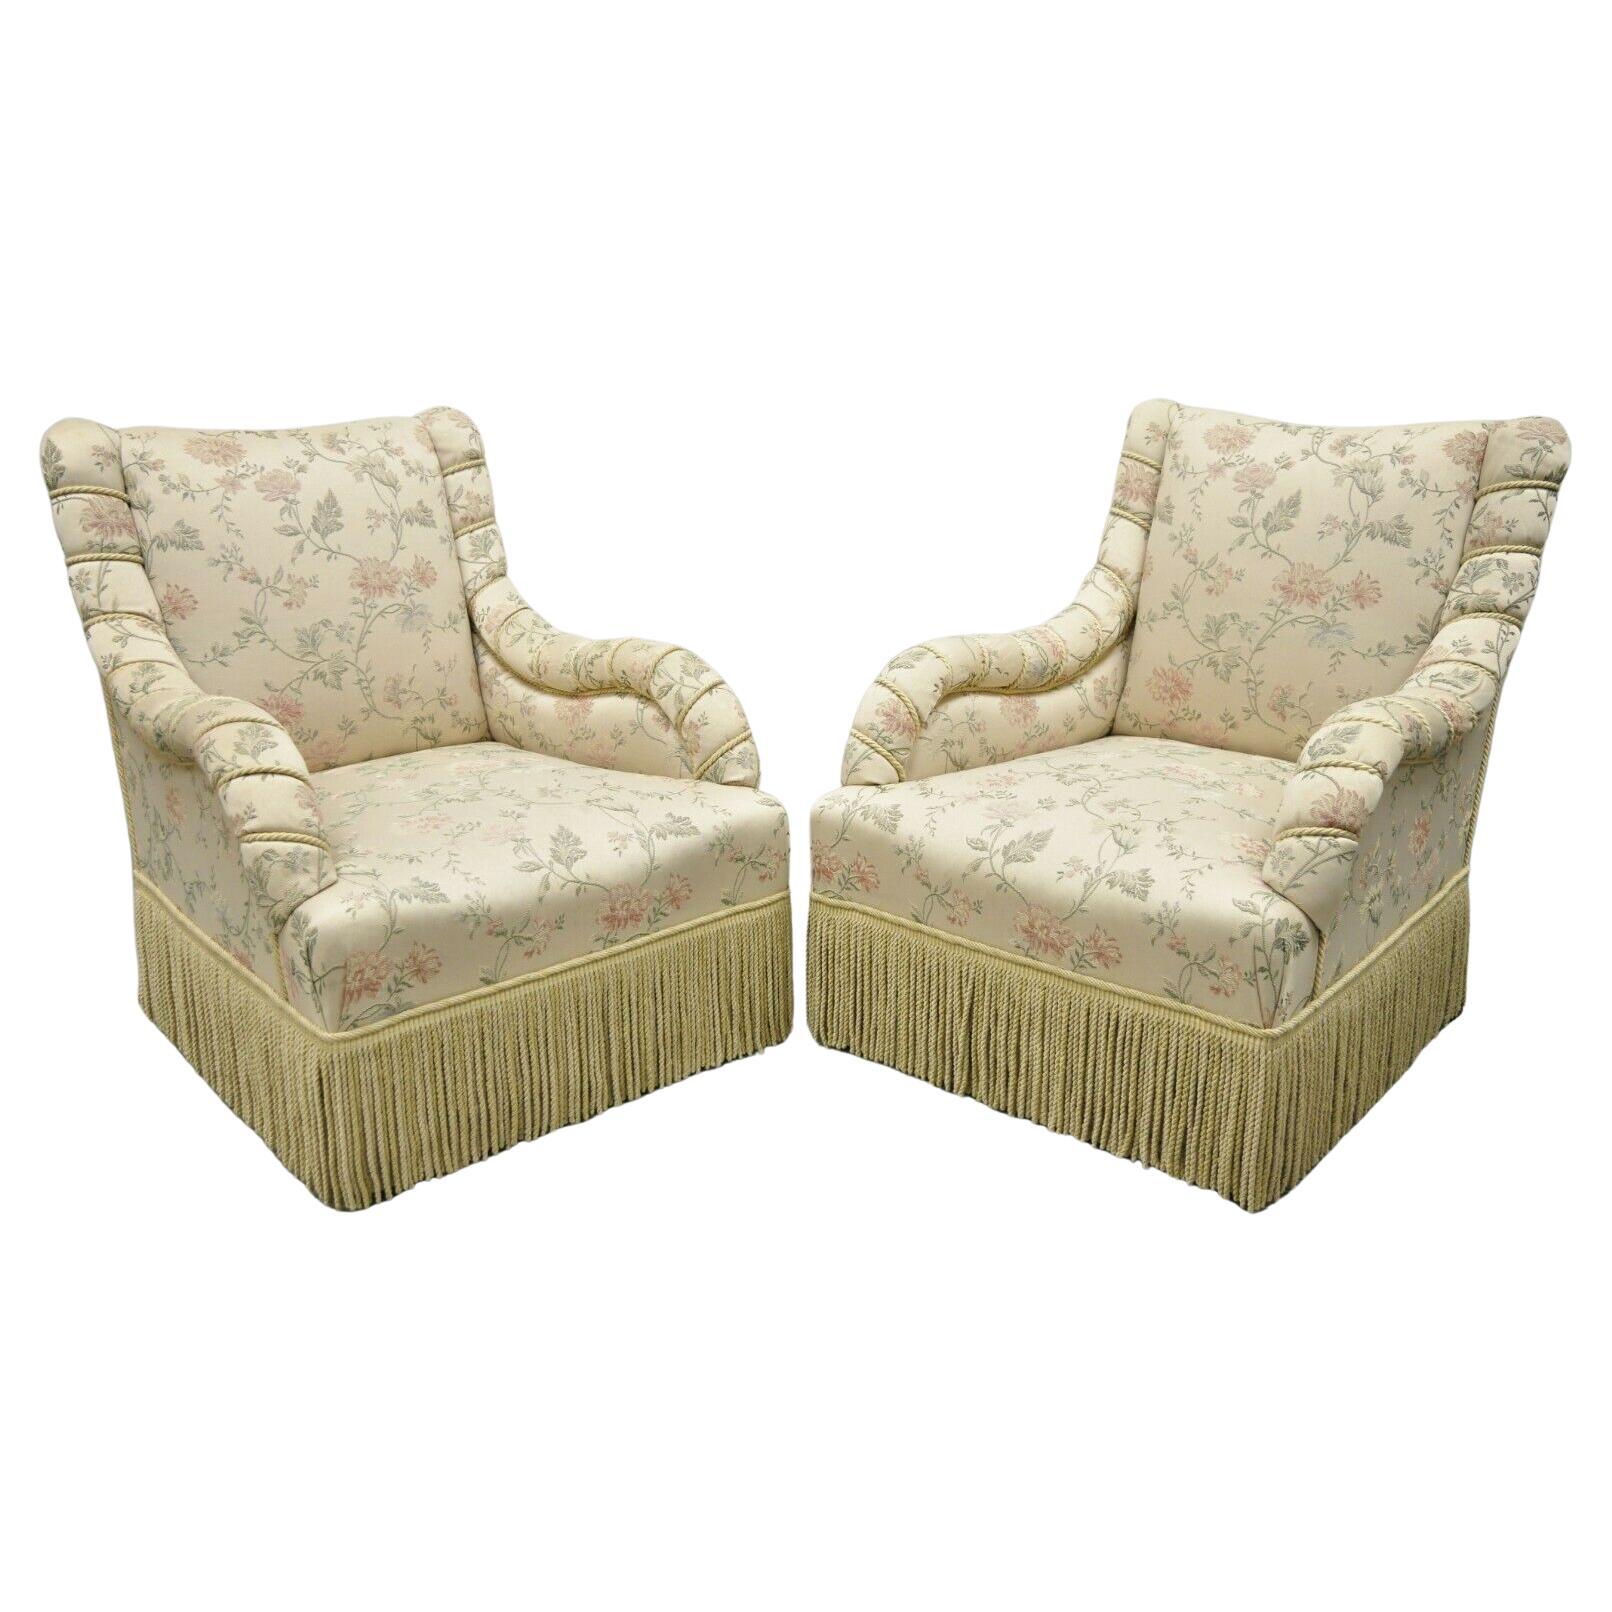 Vintage French Art Deco Style Rolled Arm Pink Gold Club Lounge Chairs, a Pair For Sale